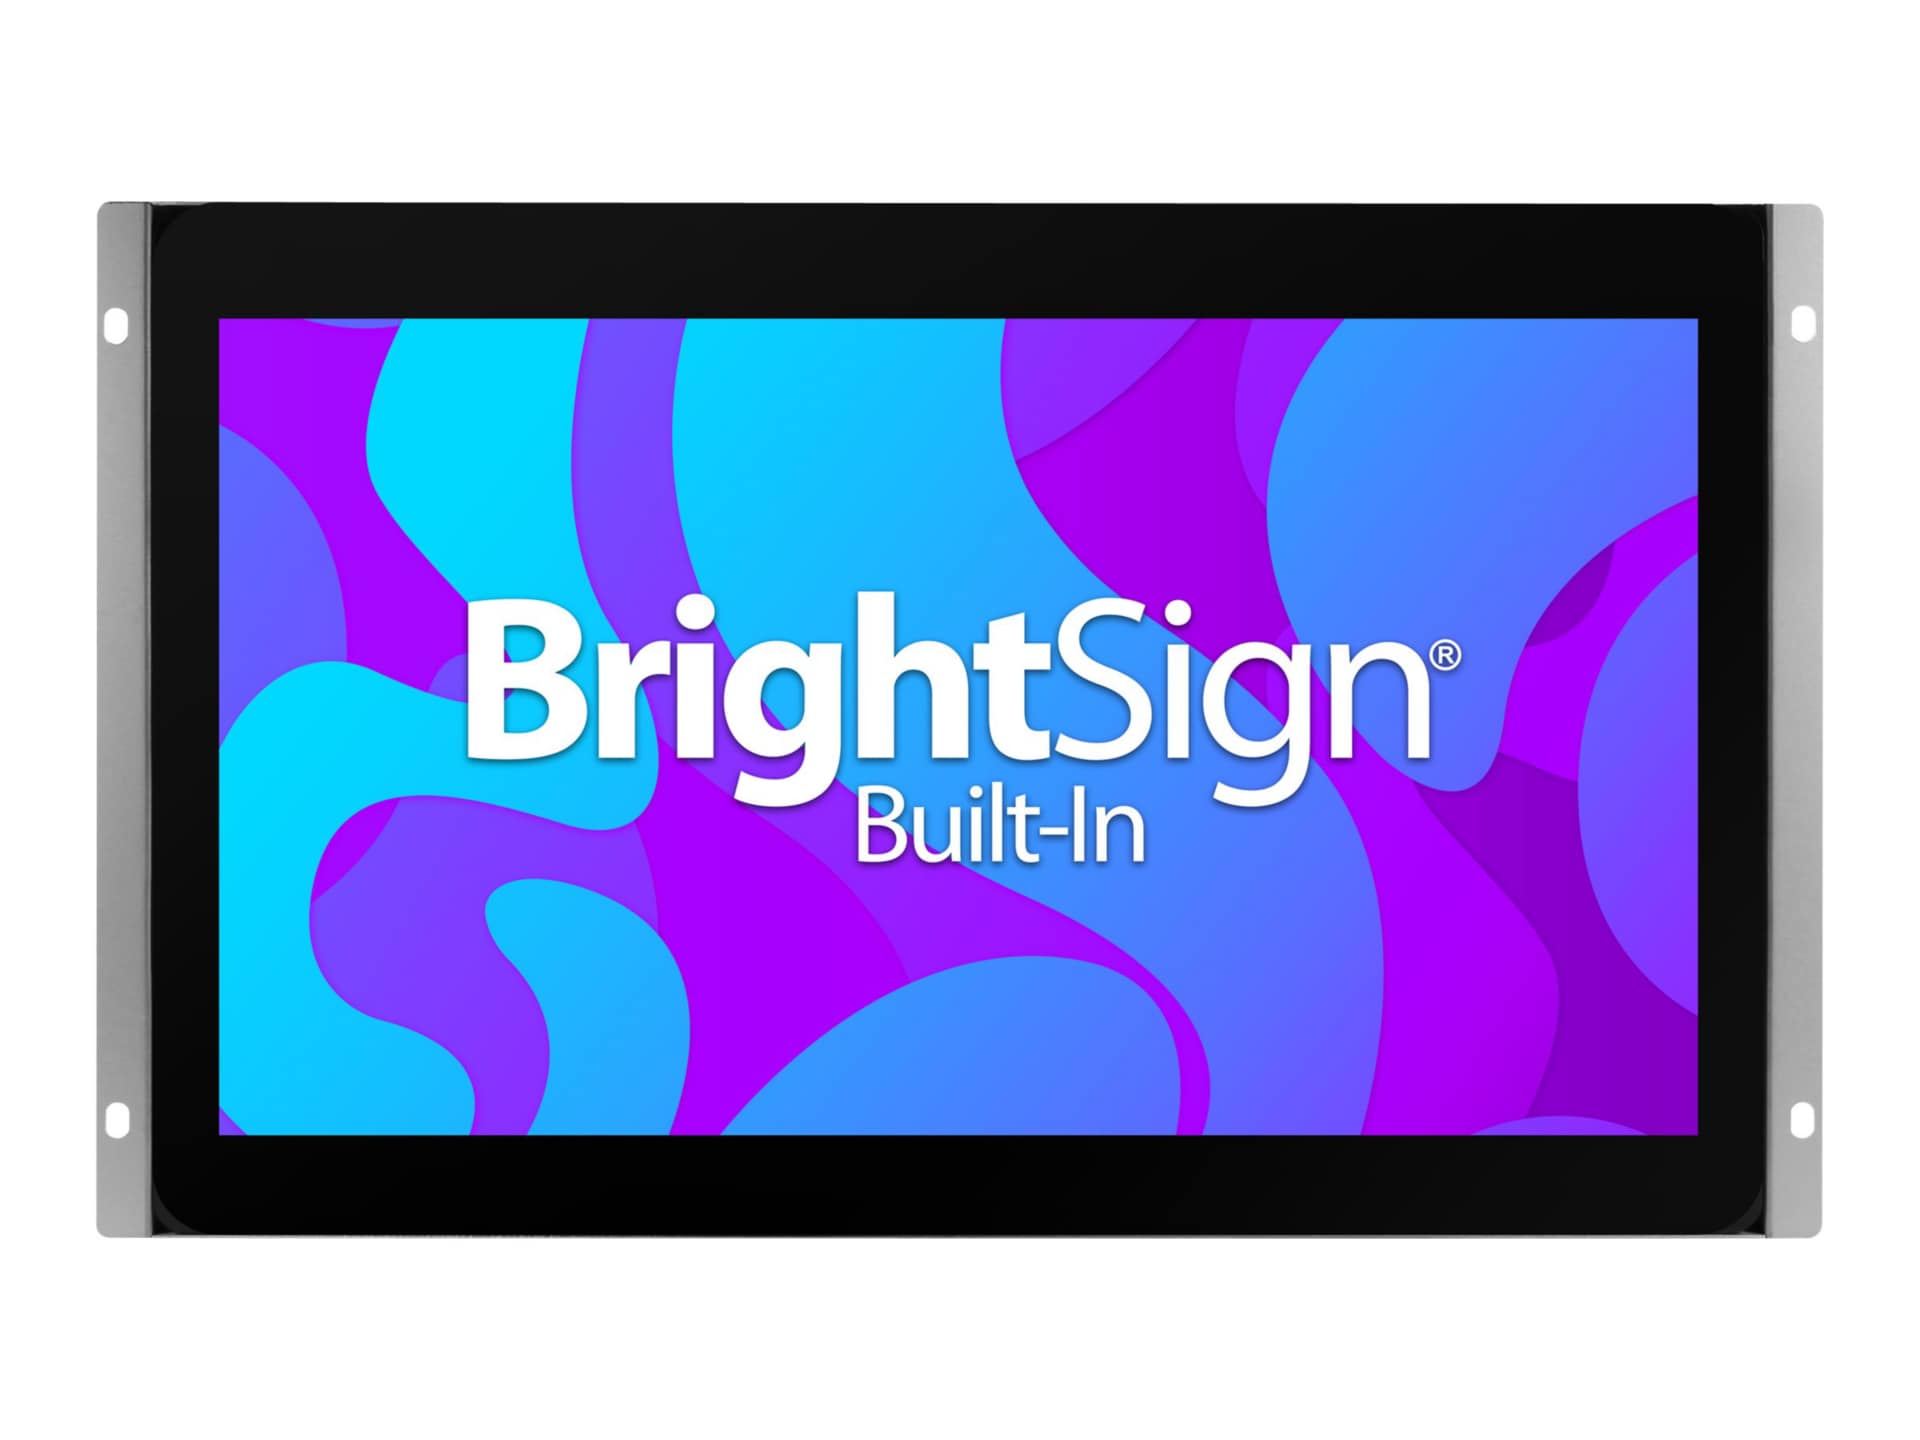 Bluefin BrightSign Built-In Touch PoE 13.3" LCD flat panel display - Full HD - for digital signage